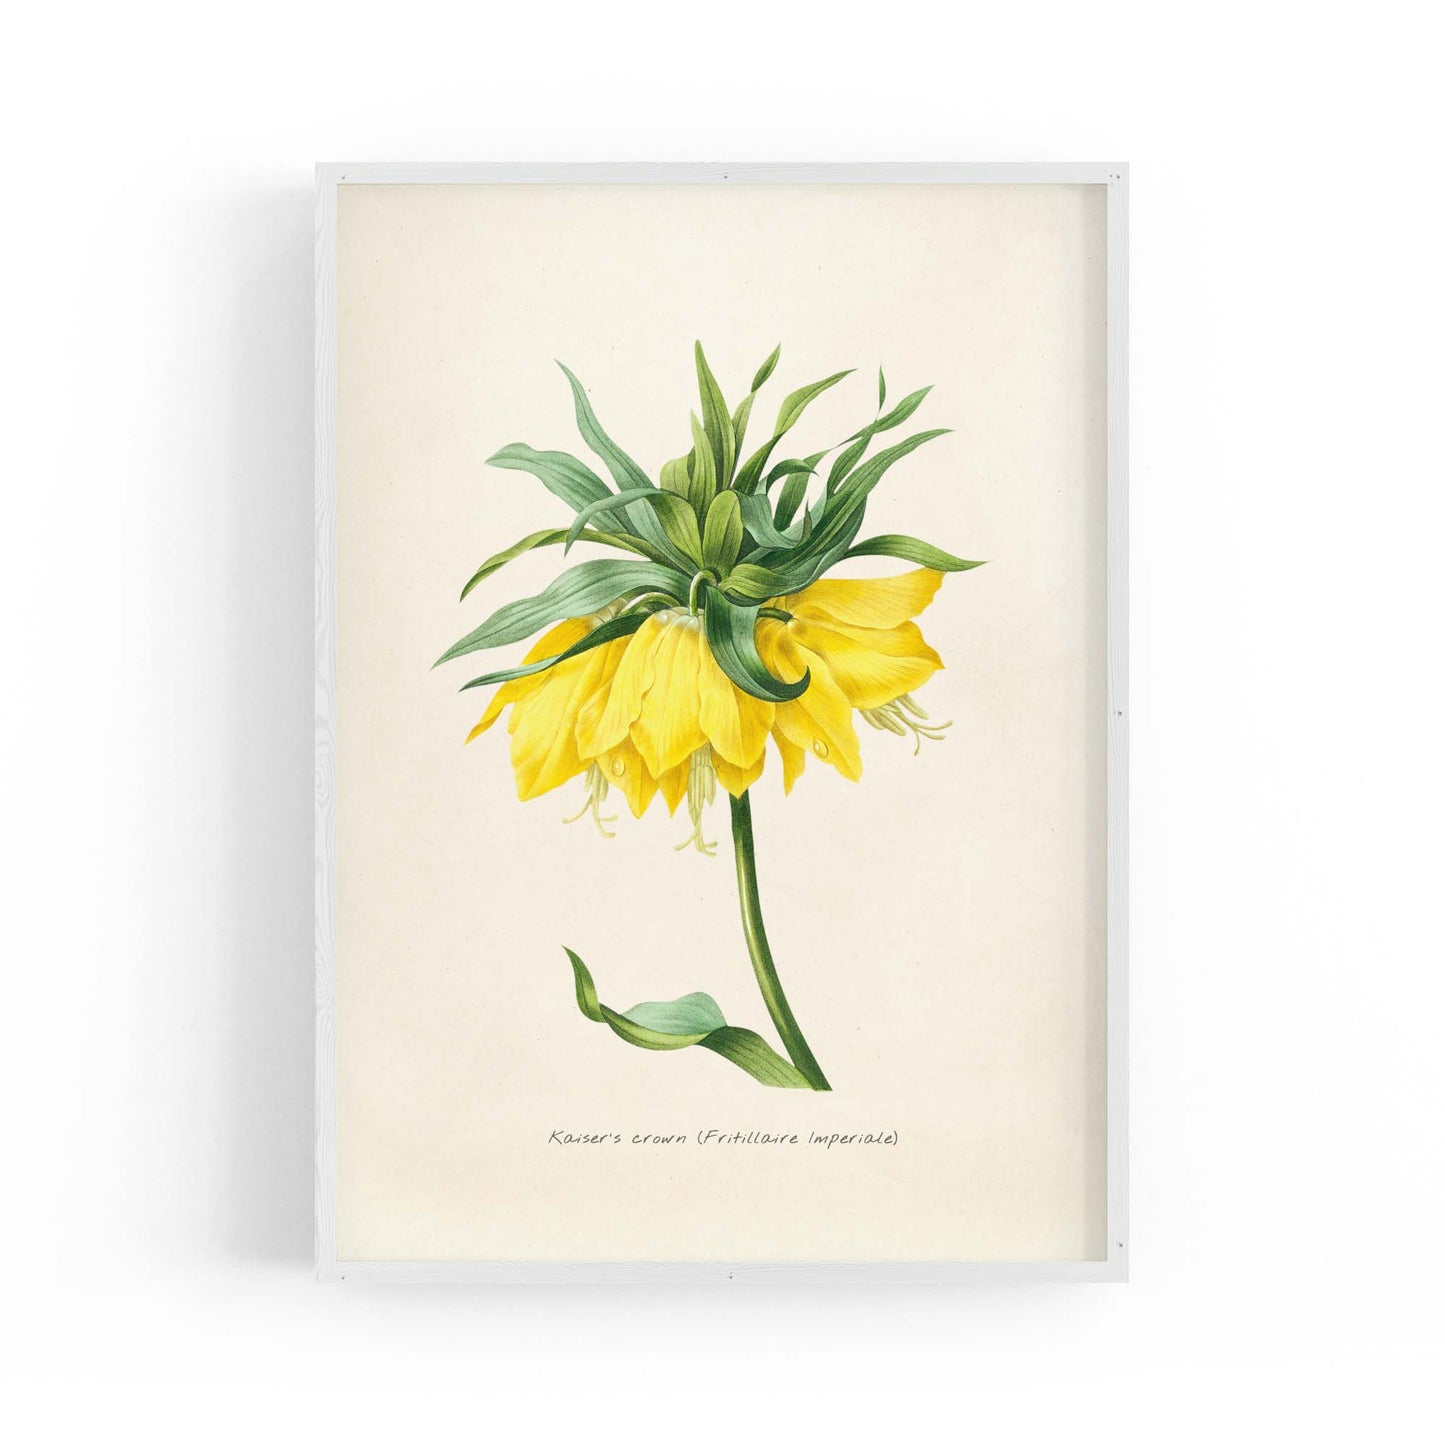 Yellow Flower Vintage Botanical Kitchen Wall Art #1 - The Affordable Art Company